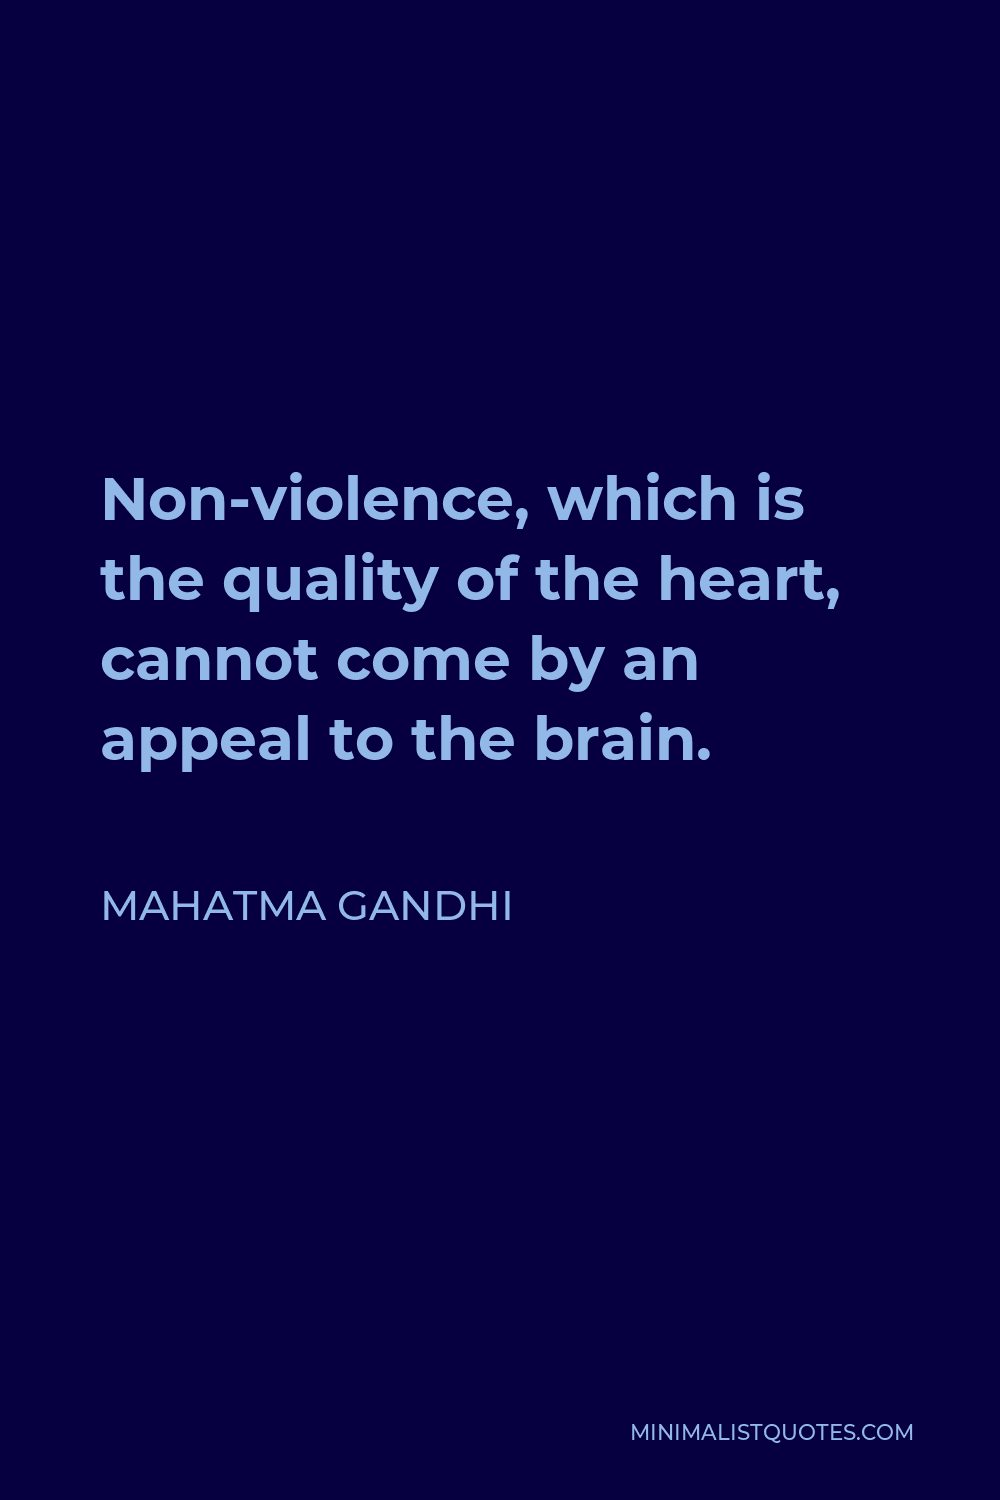 Mahatma Gandhi Quote - Non-violence, which is the quality of the heart, cannot come by an appeal to the brain.